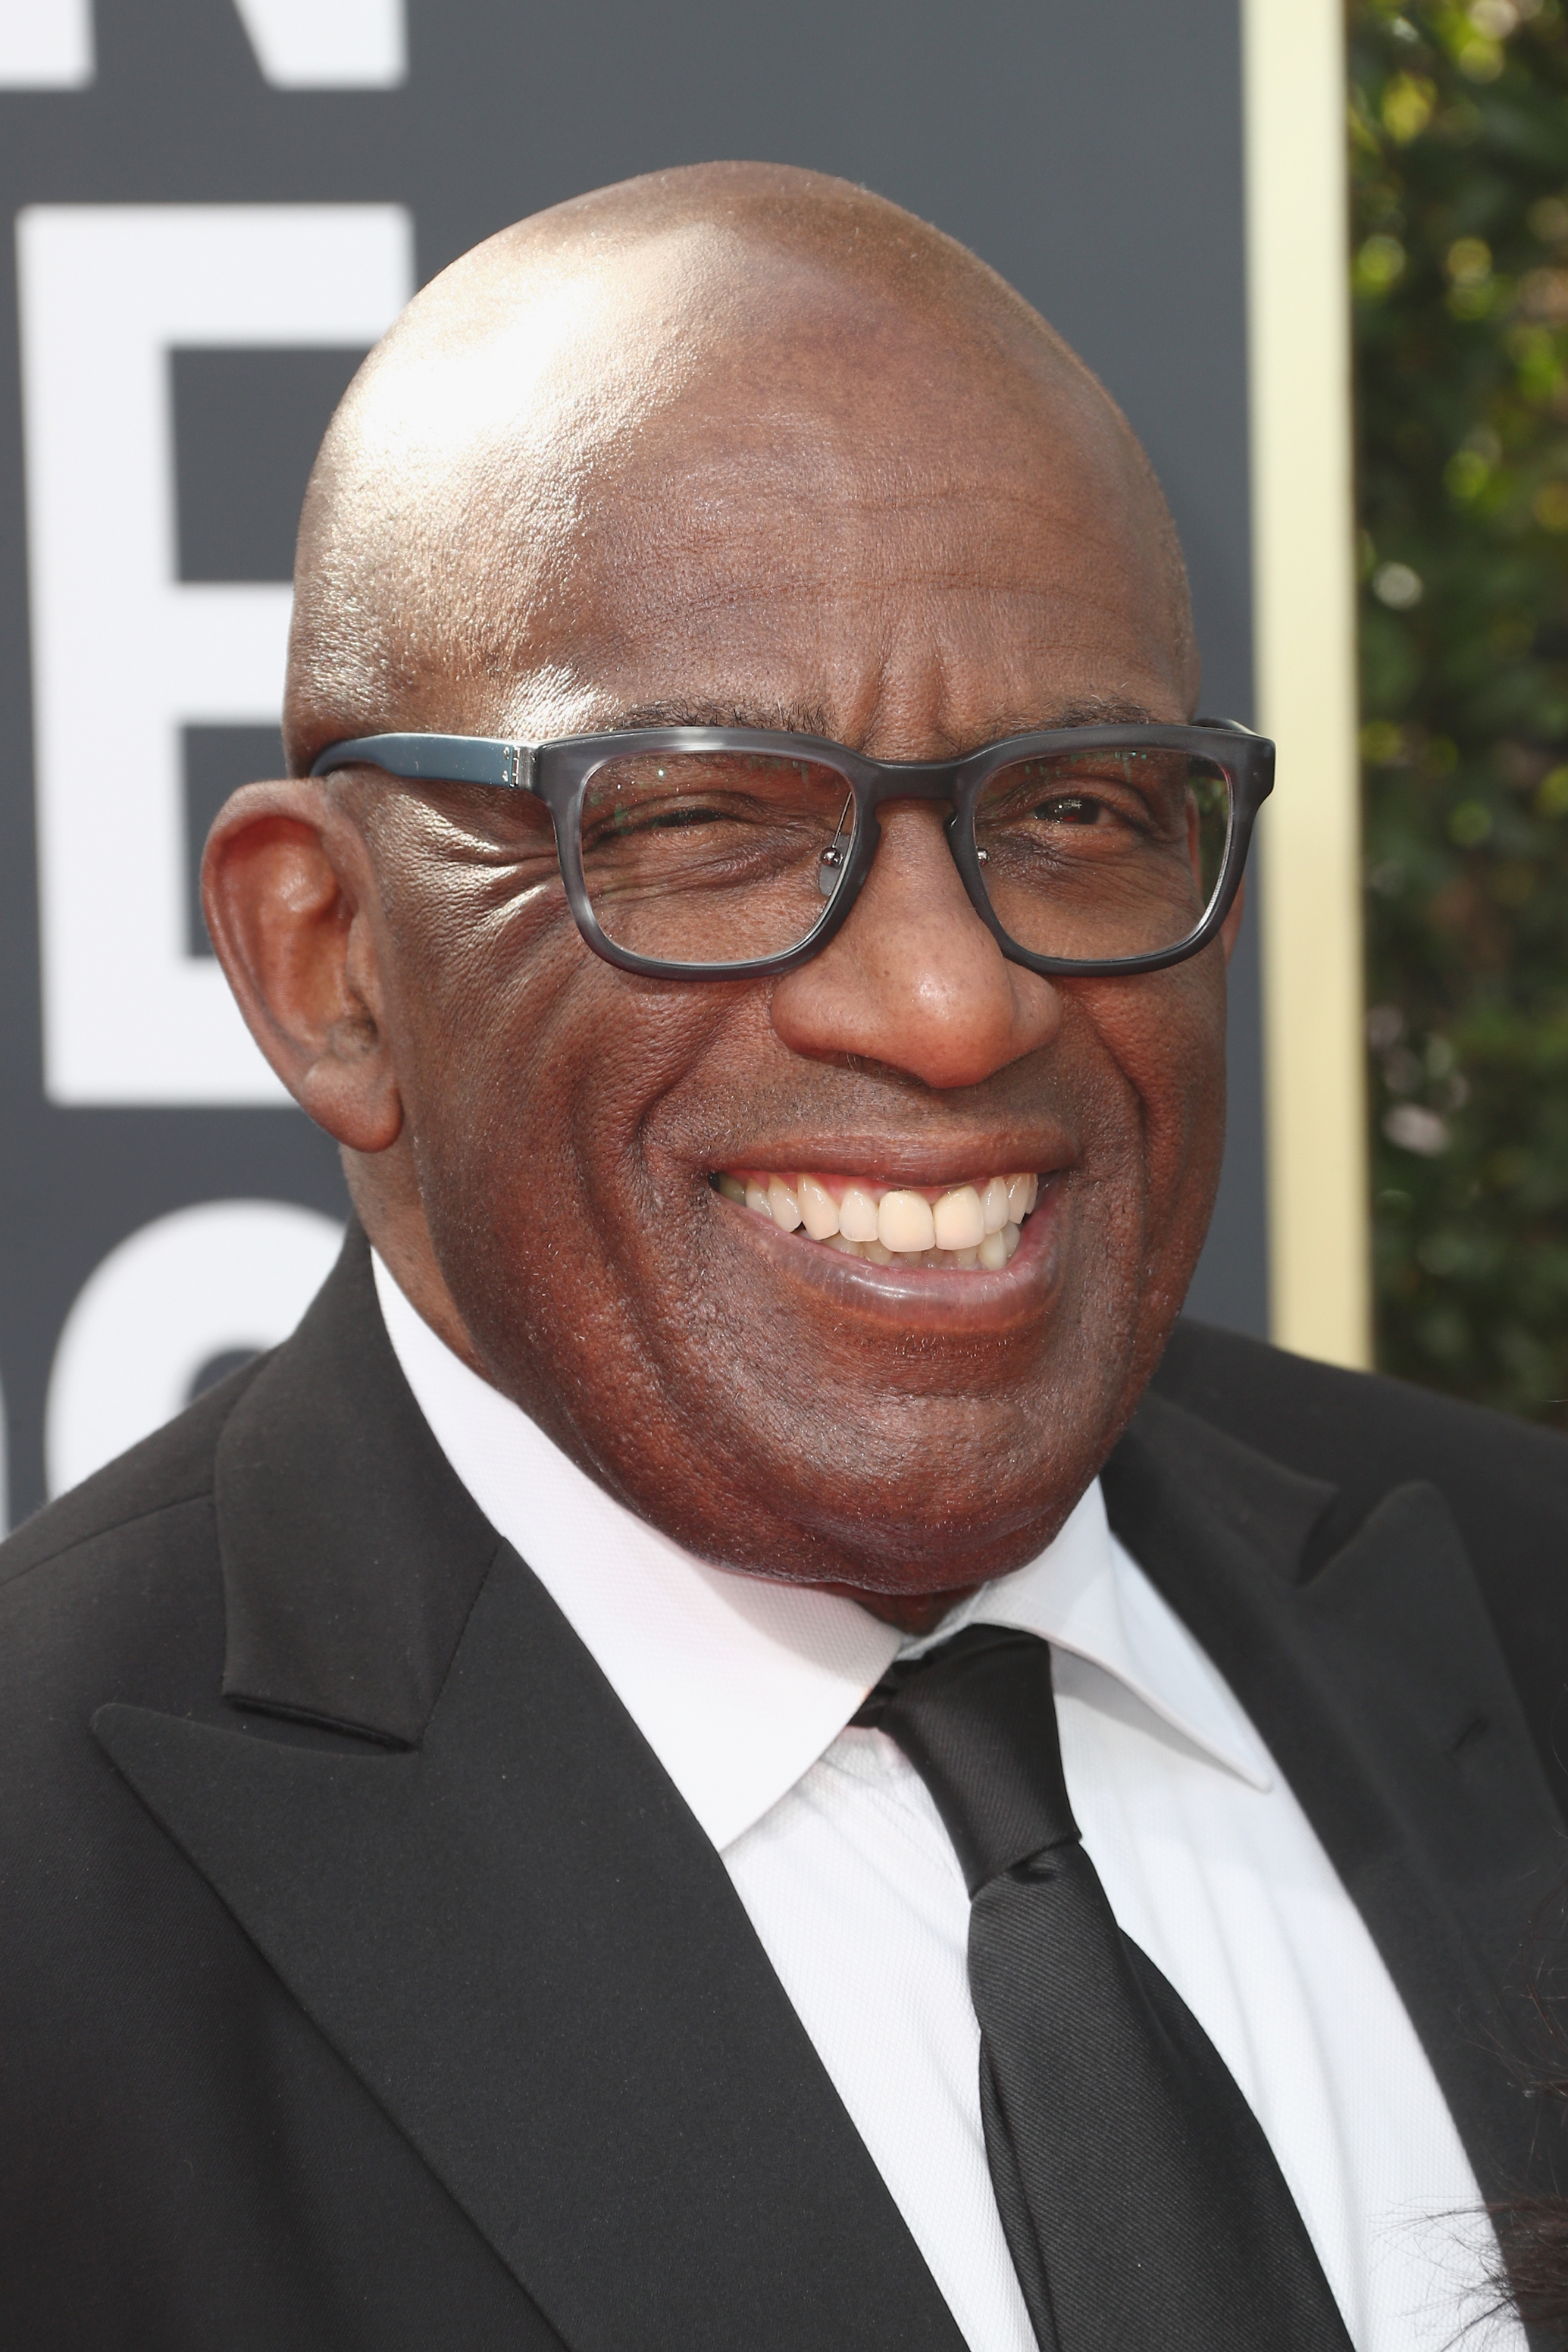 Al Roker at the 75th Annual Golden Globe Awards in Beverly Hills, California on January 7, 2018 | Source: Getty Images